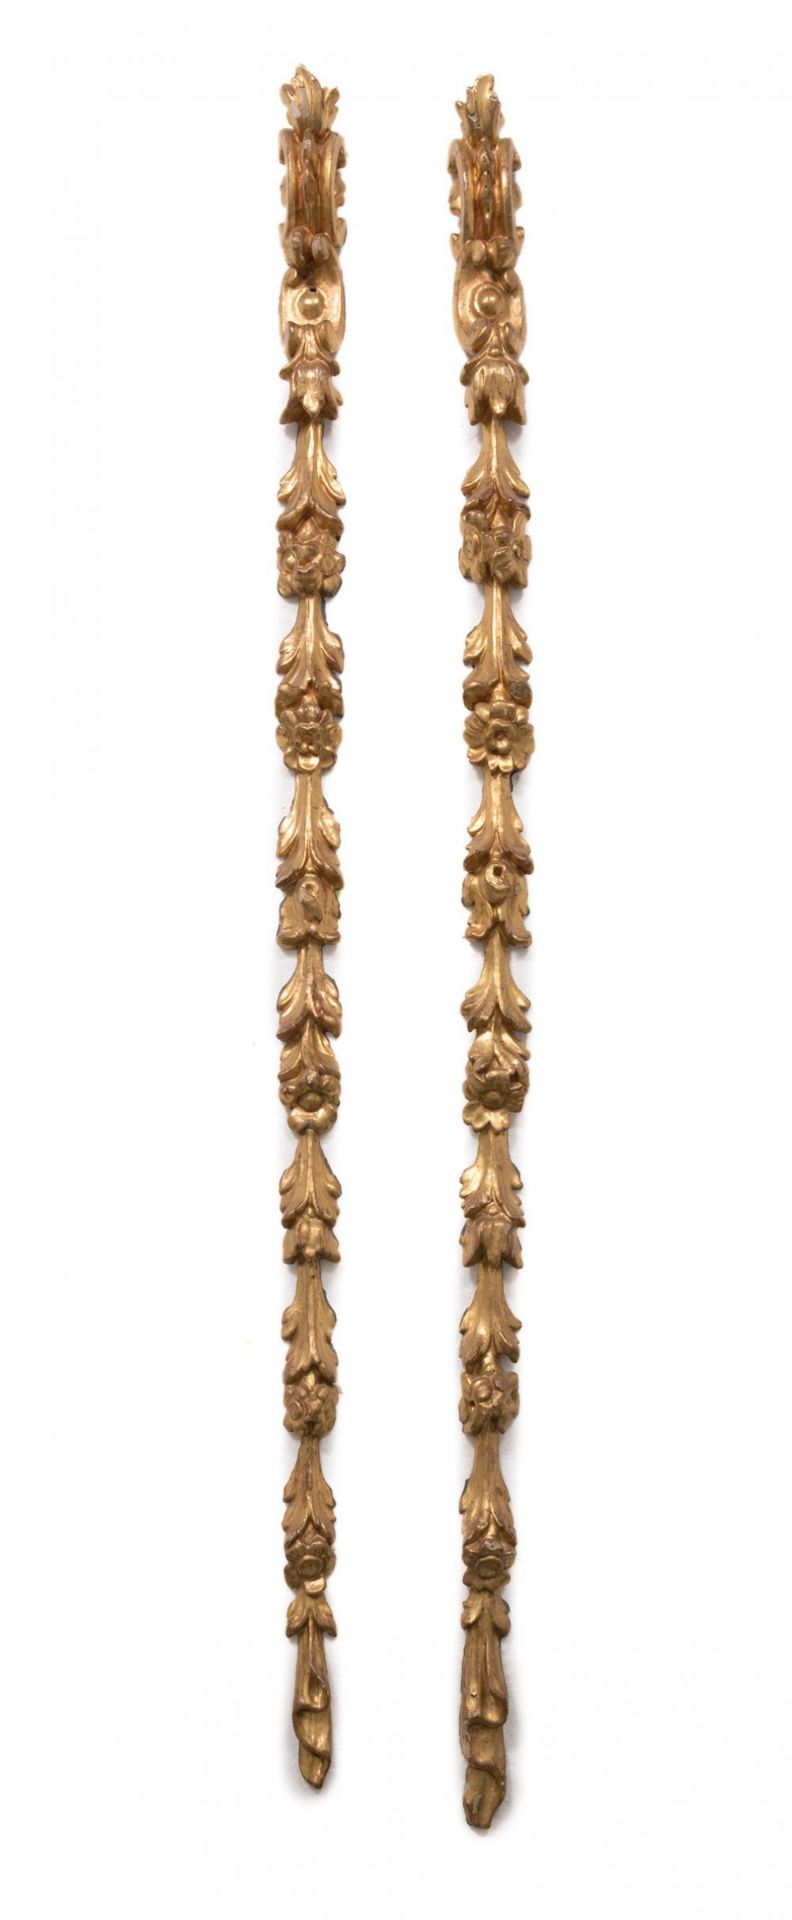 Pair of garlands from a Spanish altarpiece, end of XVII century.Carved and gilded wood.Measurements: